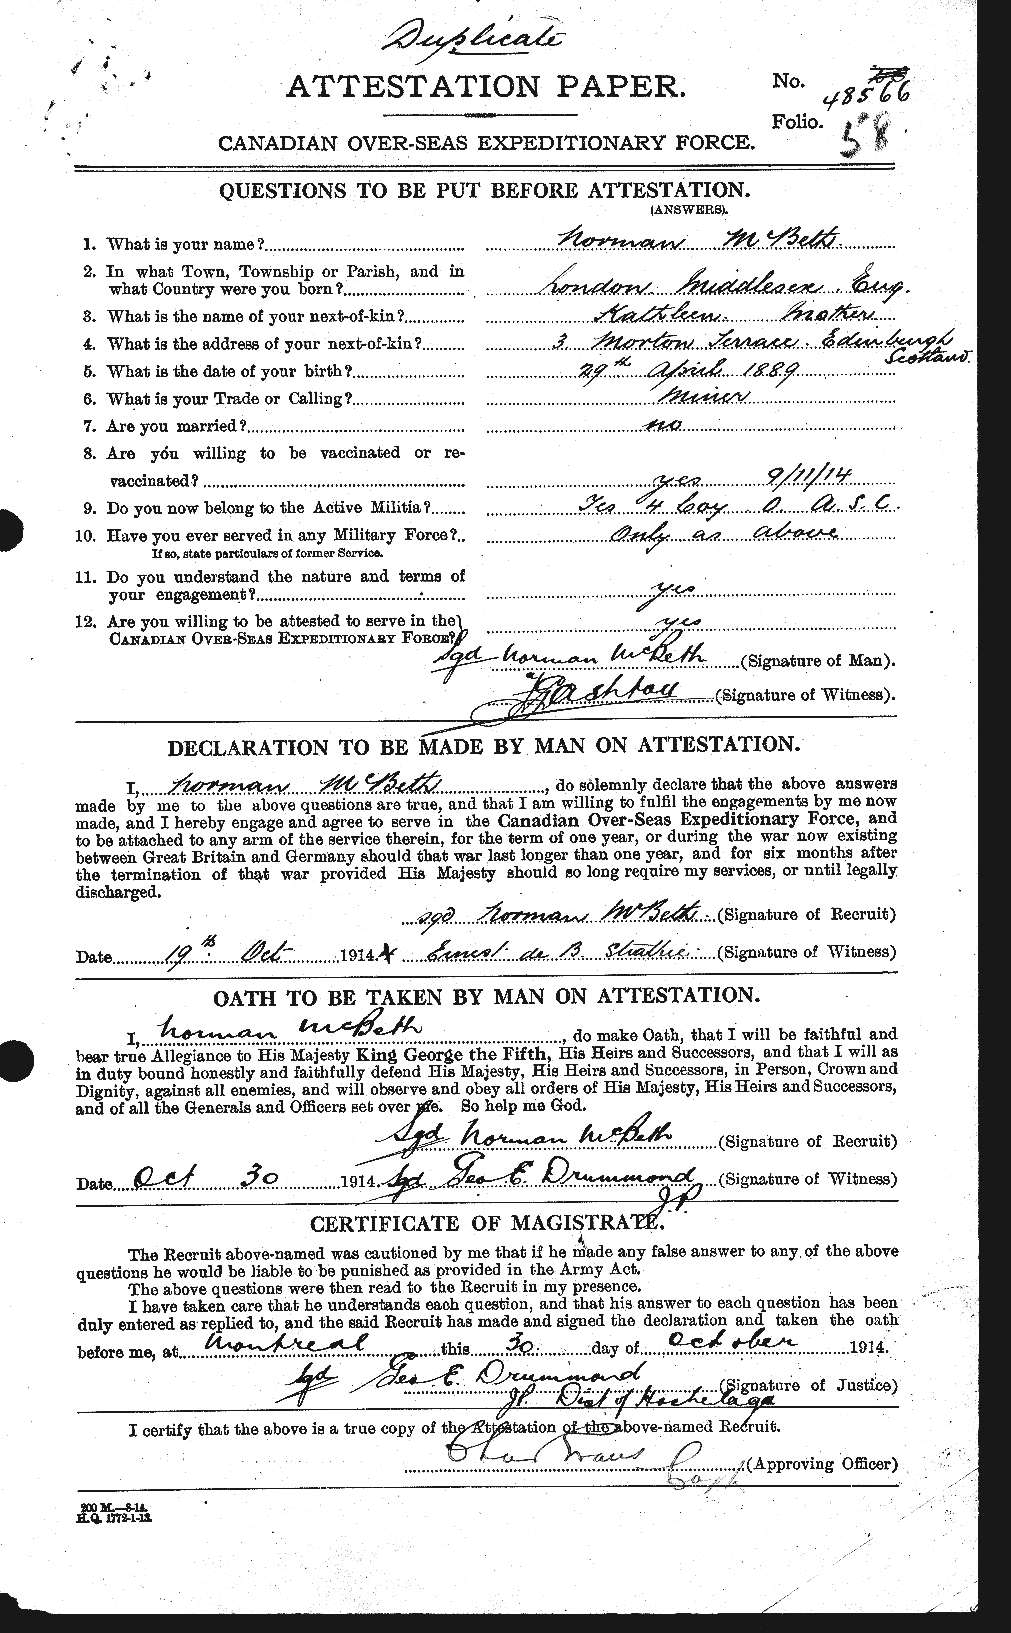 Personnel Records of the First World War - CEF 132105a